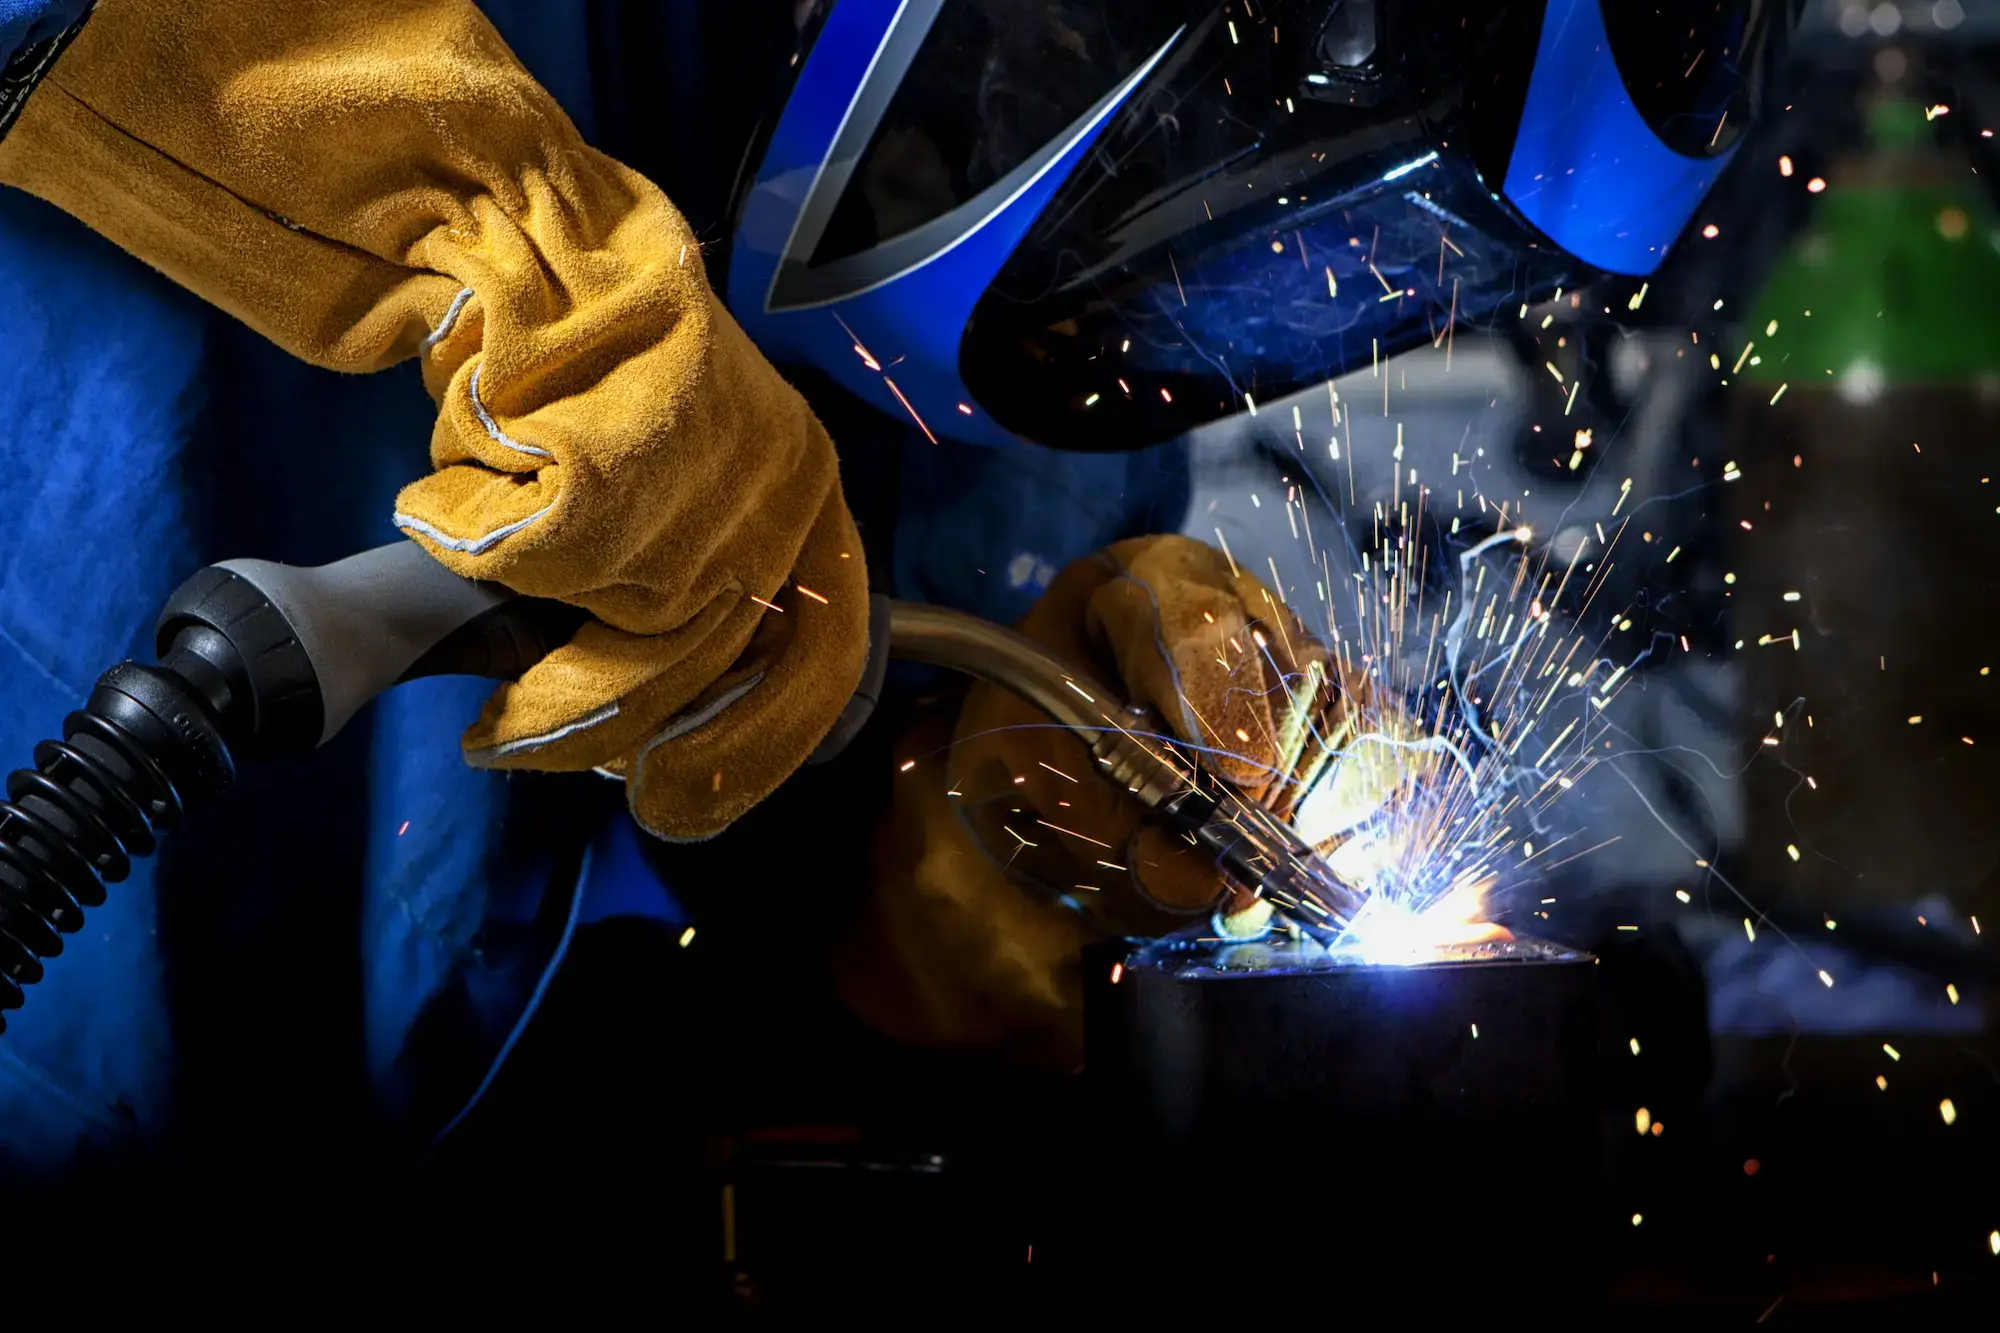 Related metal fabrication services